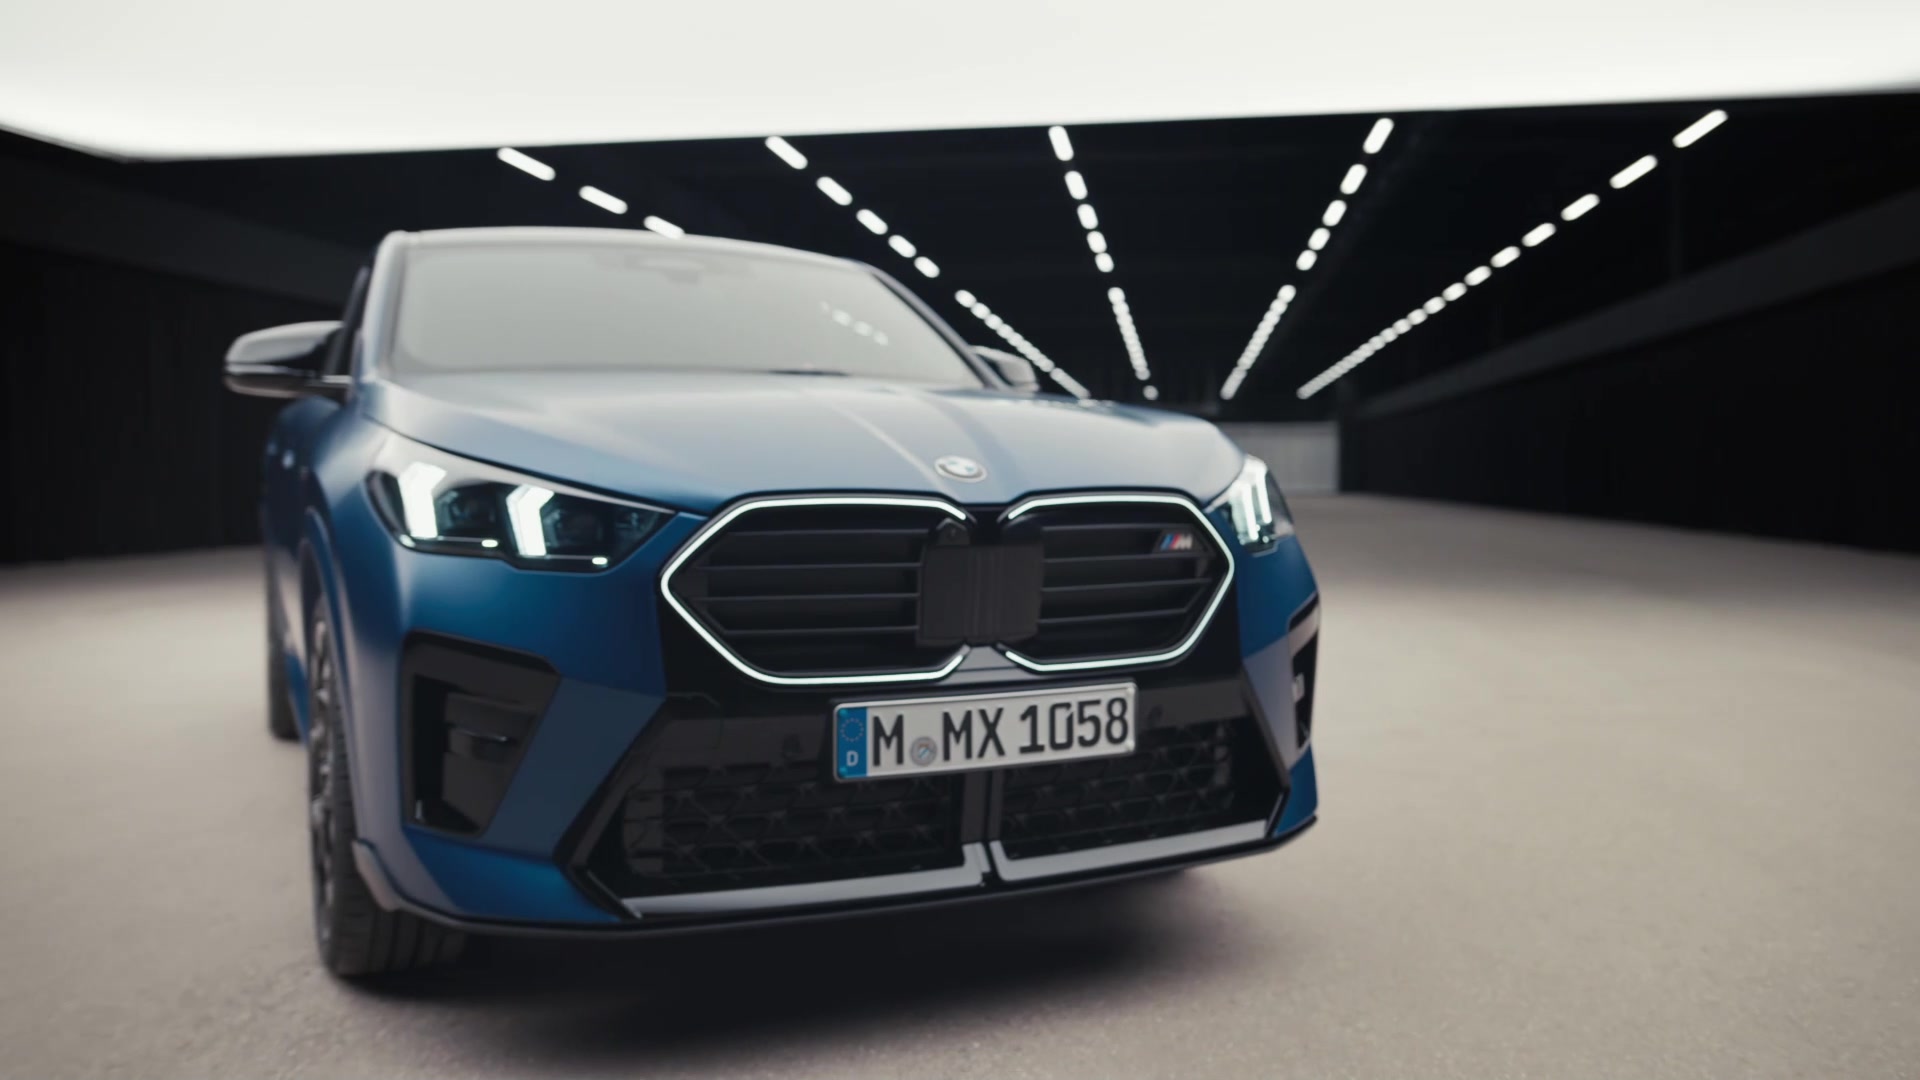 The all-new BMW X2 M35i xDrive